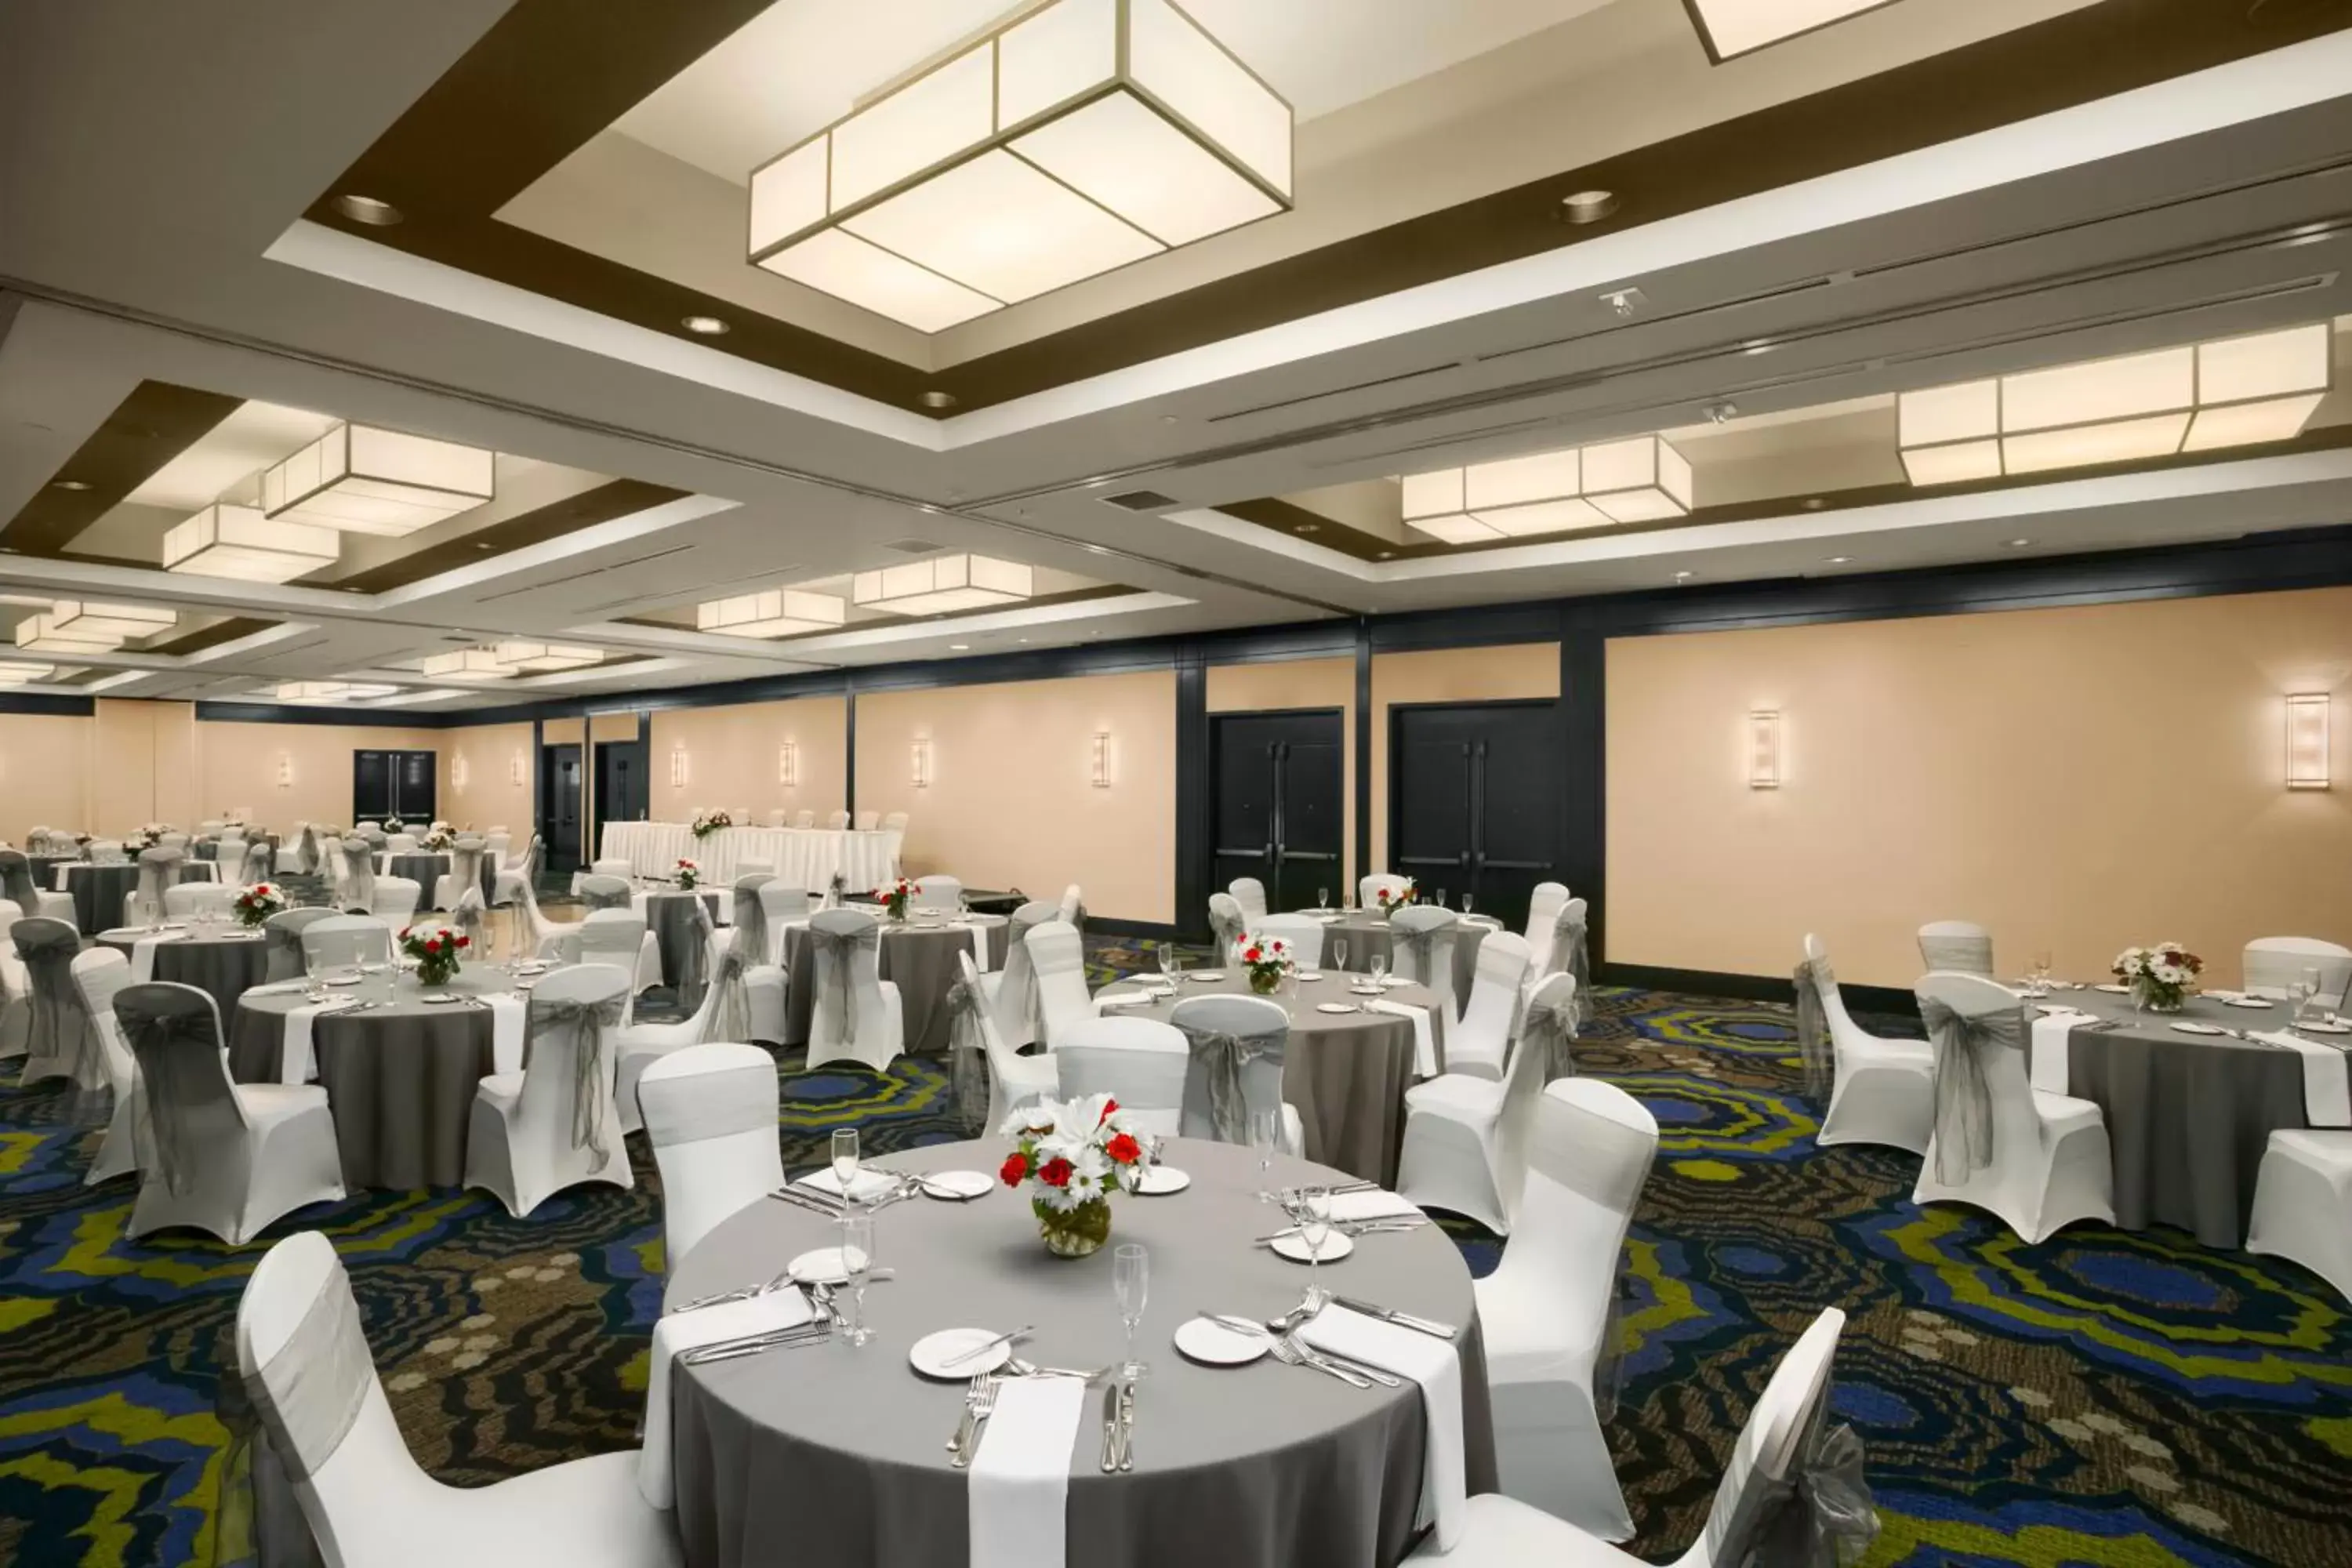 Business facilities, Banquet Facilities in Wyndham Pittsburgh University Center